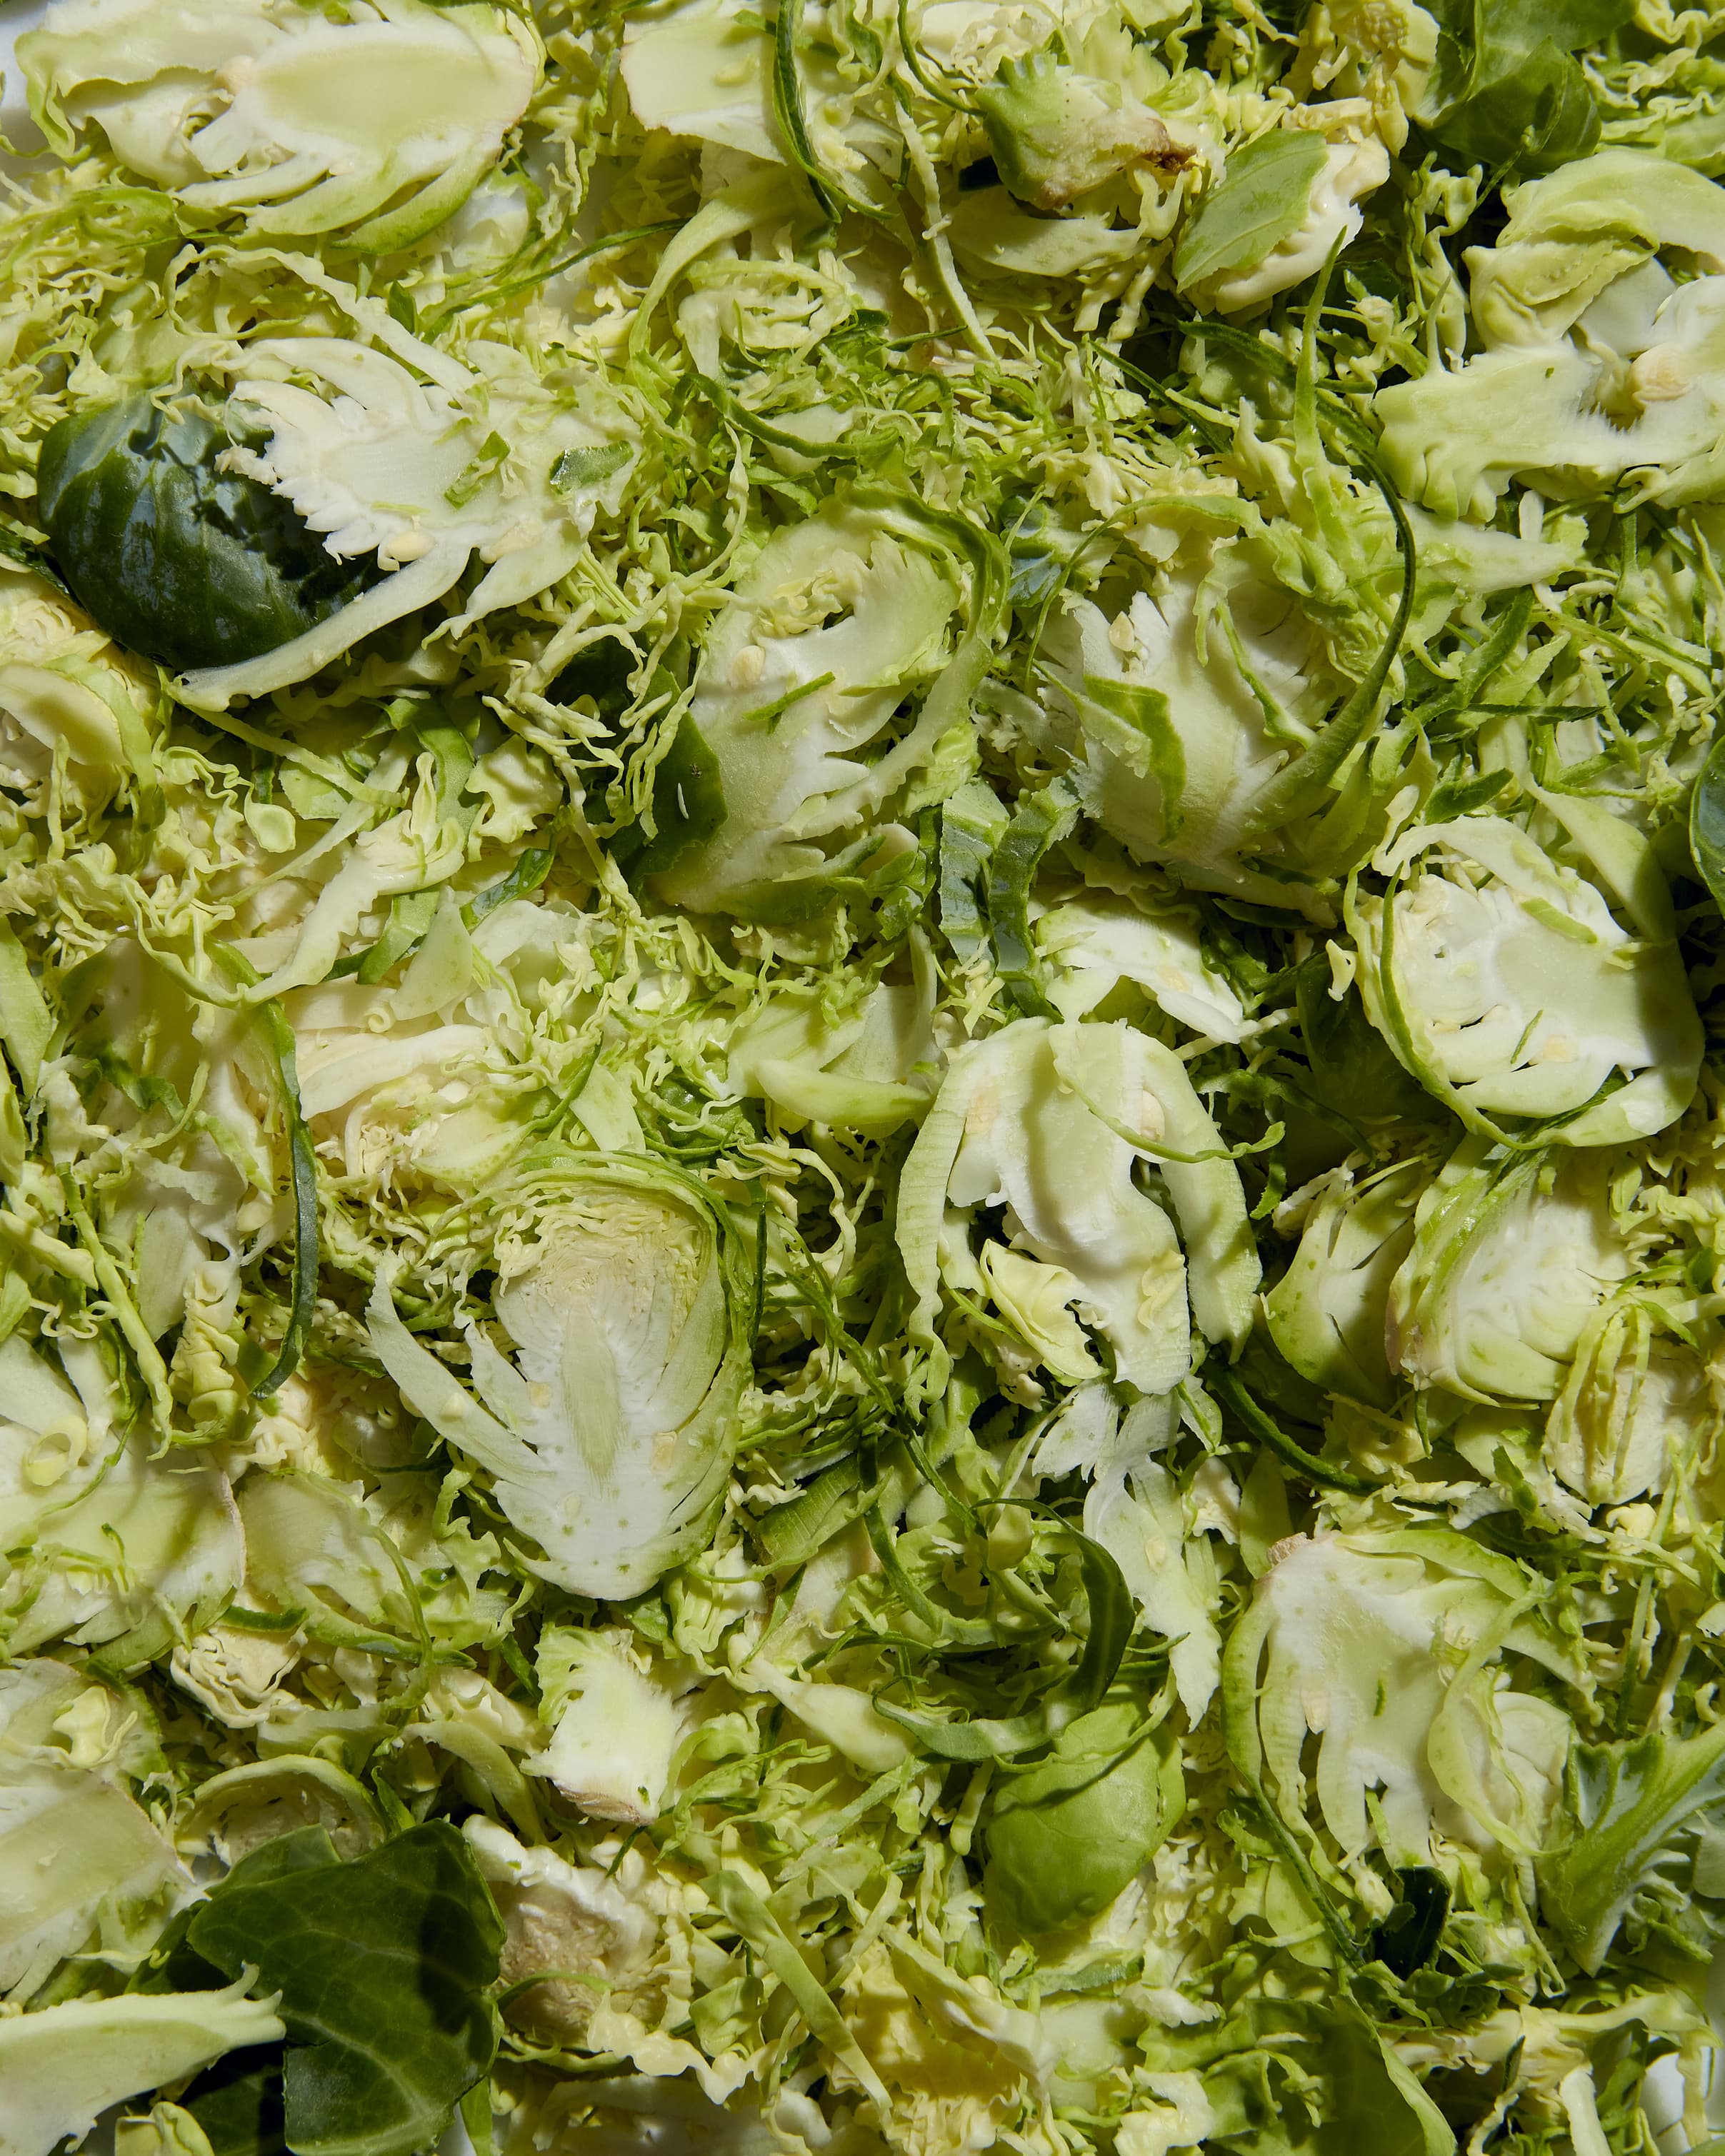 https://cdn.apartmenttherapy.info/image/upload/v1660582247/k/Photo/Series/2022-09-how-to-shave-brussels-sprouts/How-to-Shave-Sprouts-116.jpg